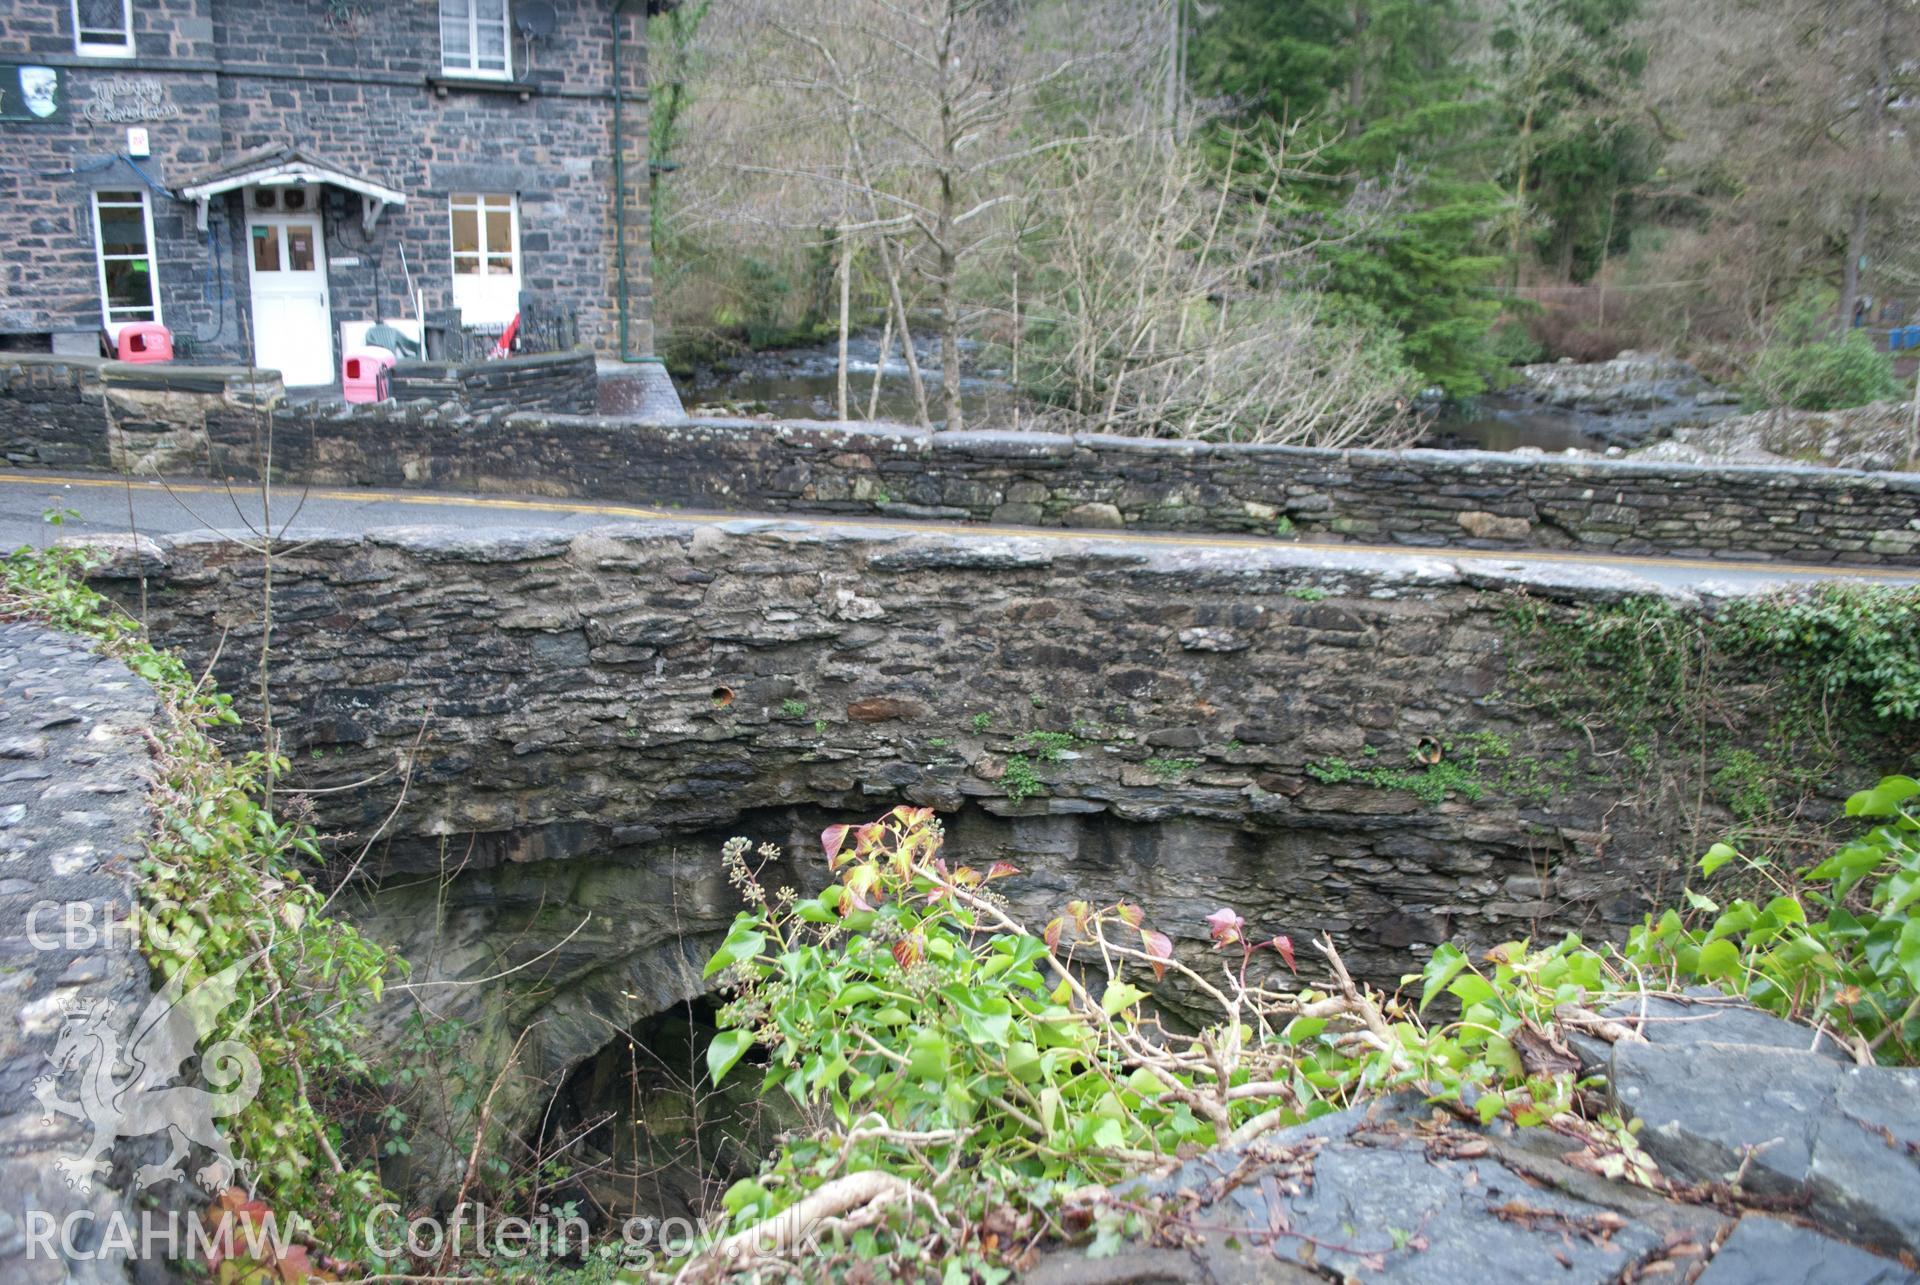 General view of damaged section of Pont y Pair parapet wall viewed from the south east. Digital photograph taken for Archaeological Watching Brief at Pont y Pair, Betws y Coed, 2019. Gwynedd Archaeological Trust Project ref G2587.